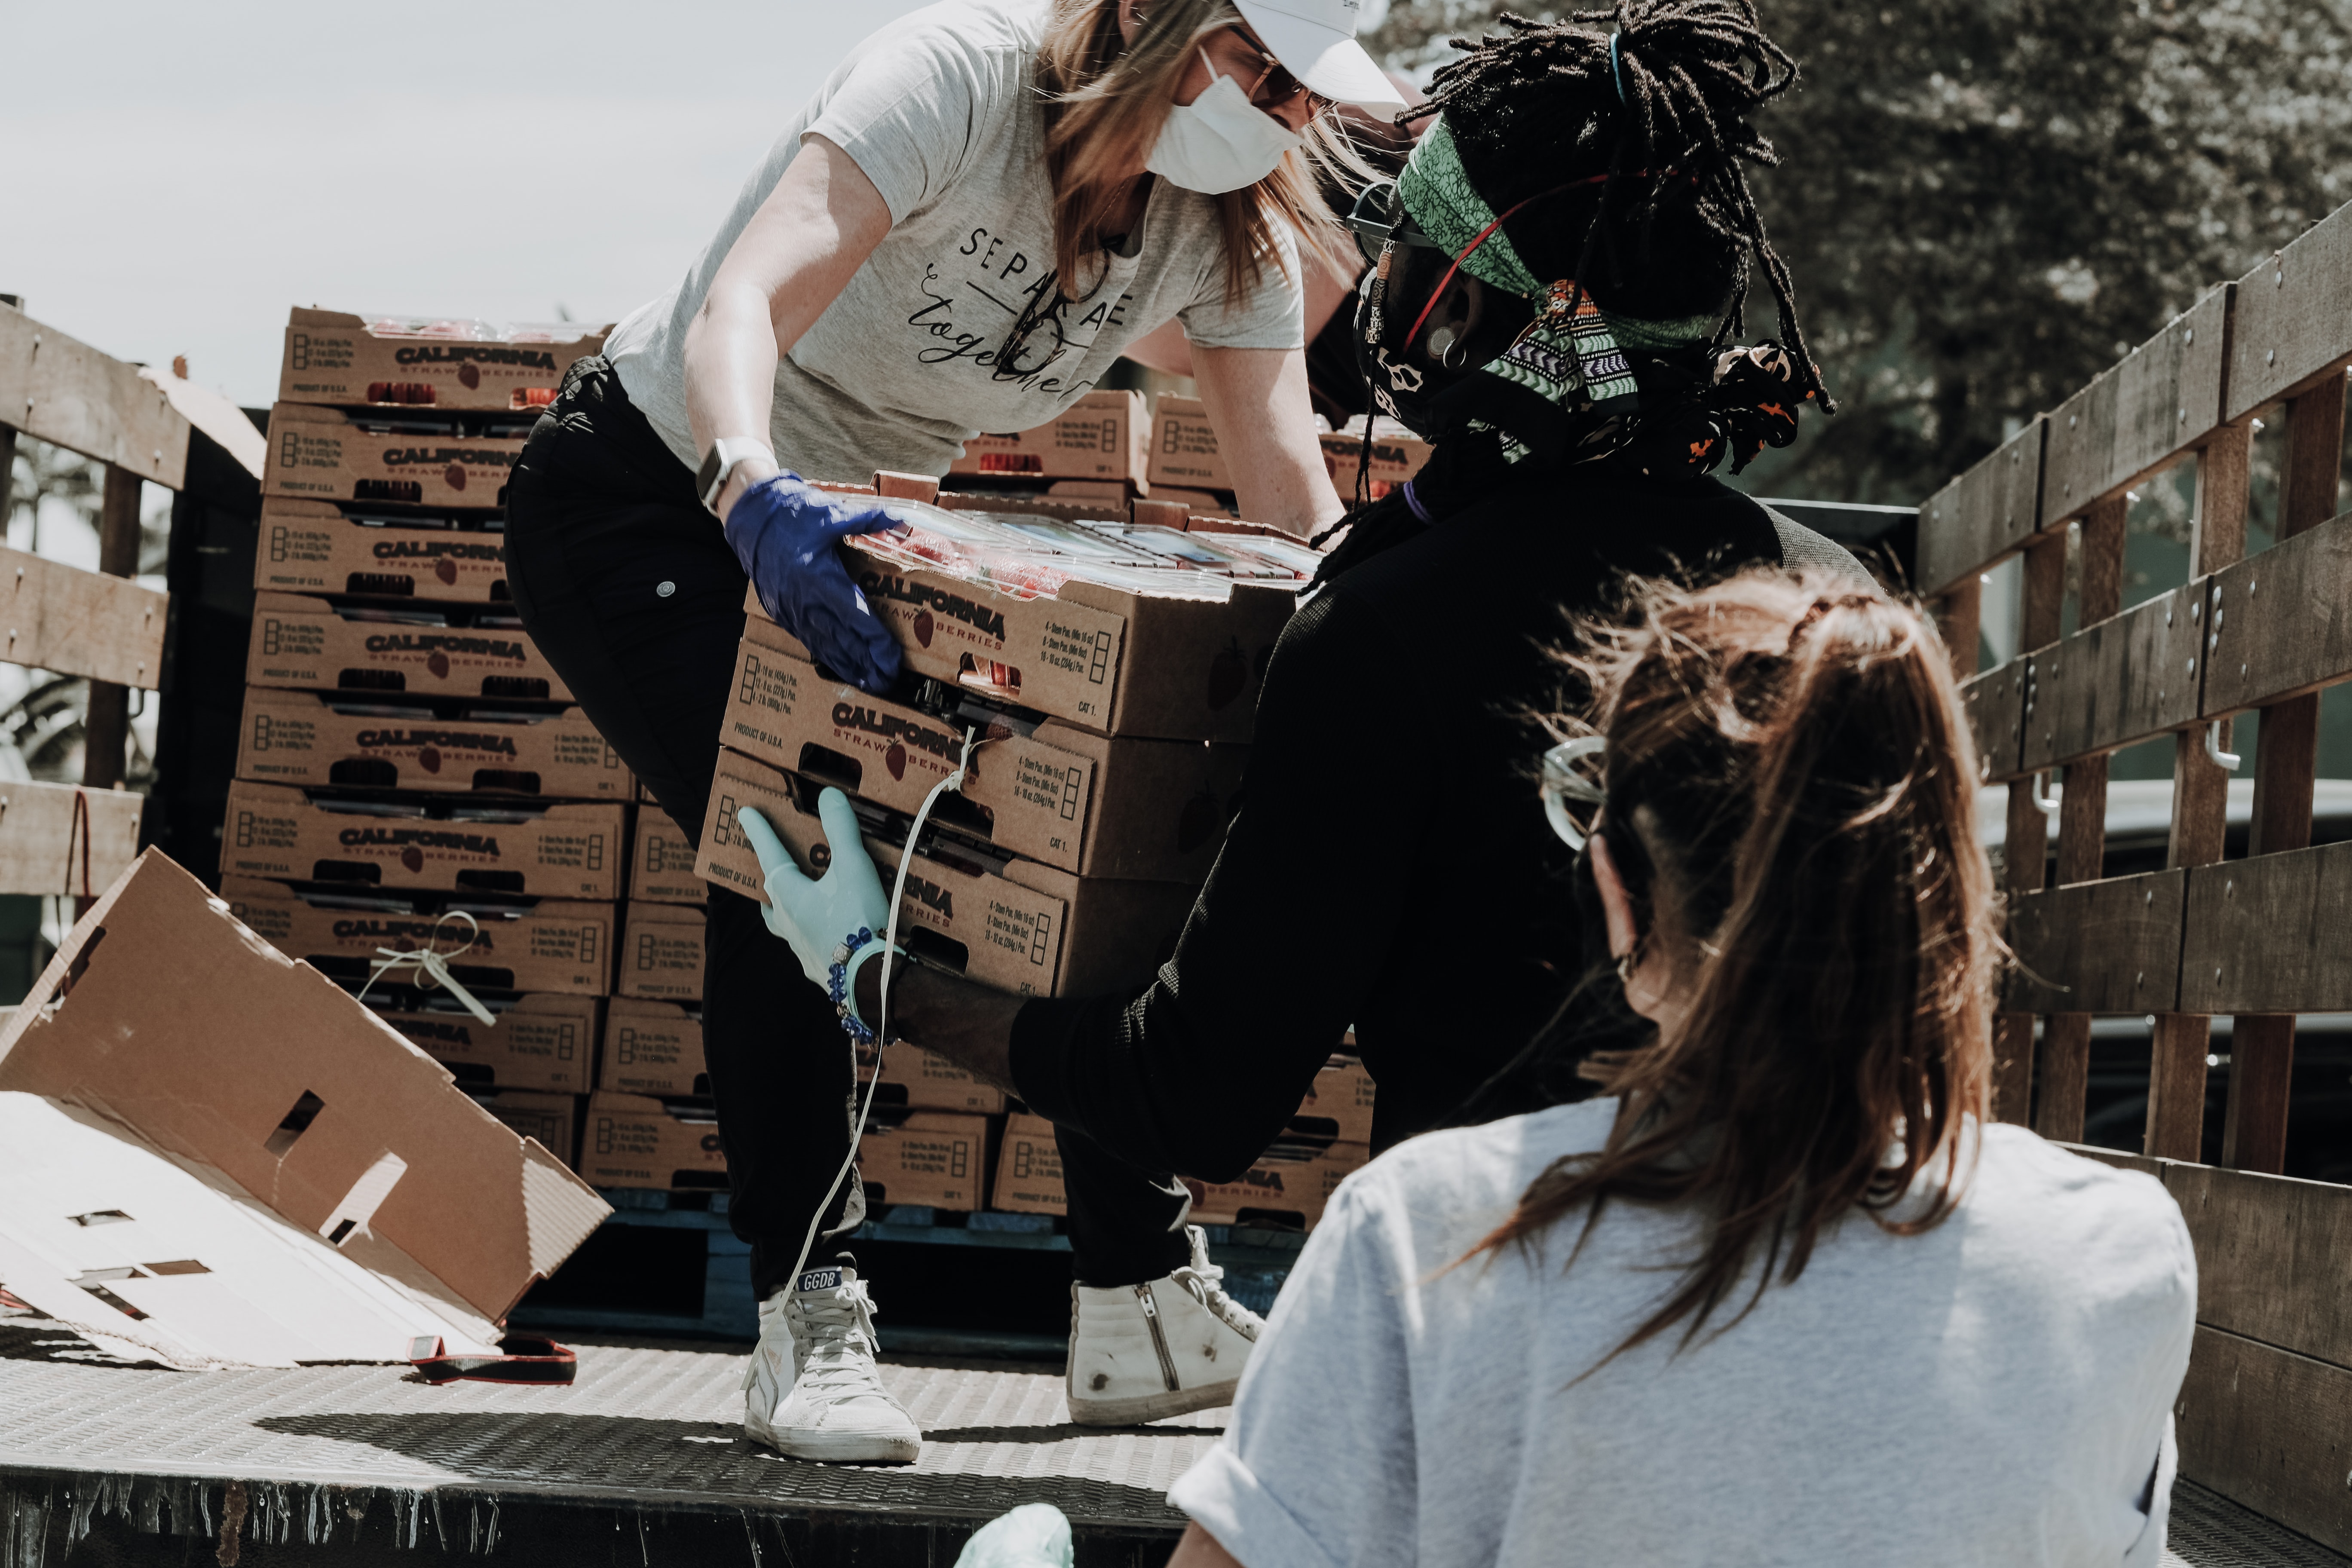 People volunteering and loading produce onto truck